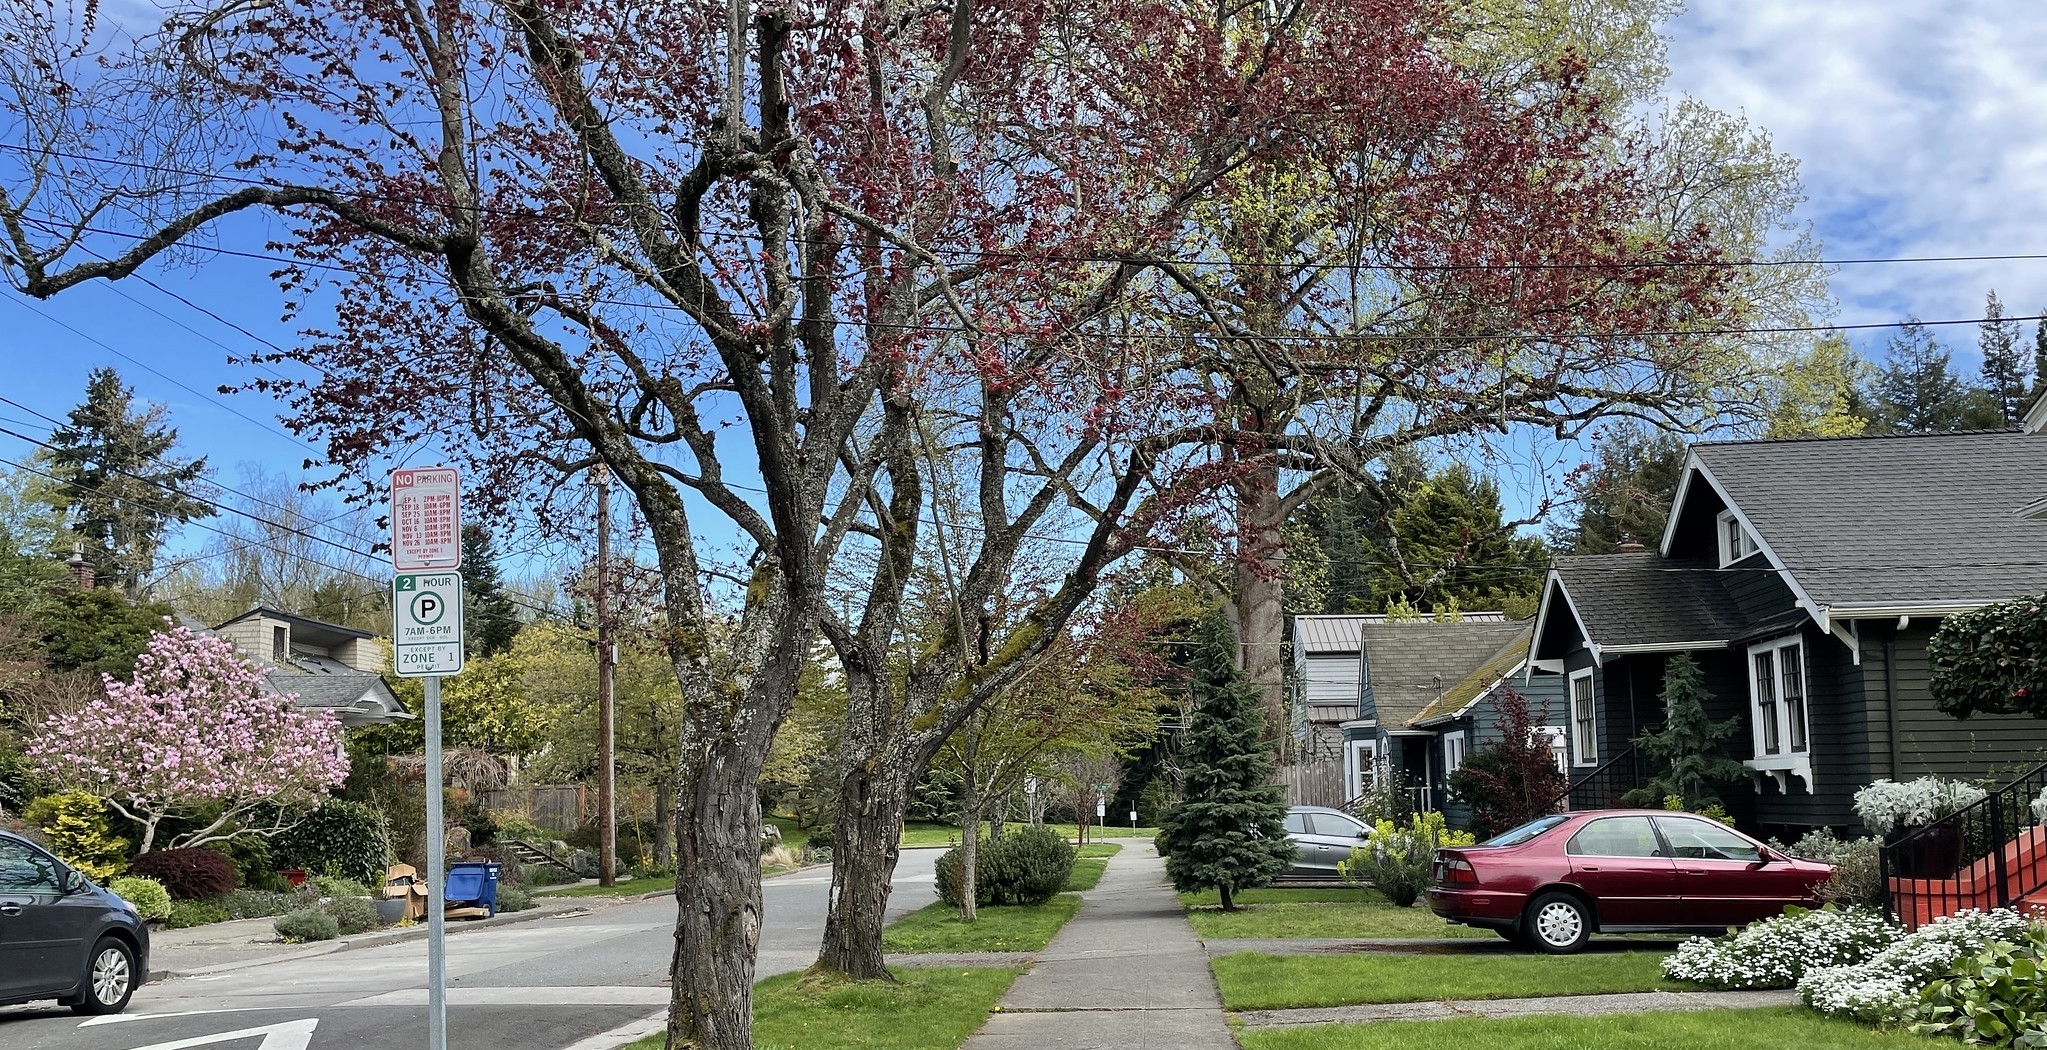 An example of a placement of an RPZ sign on a neighborhood street in Montlake.